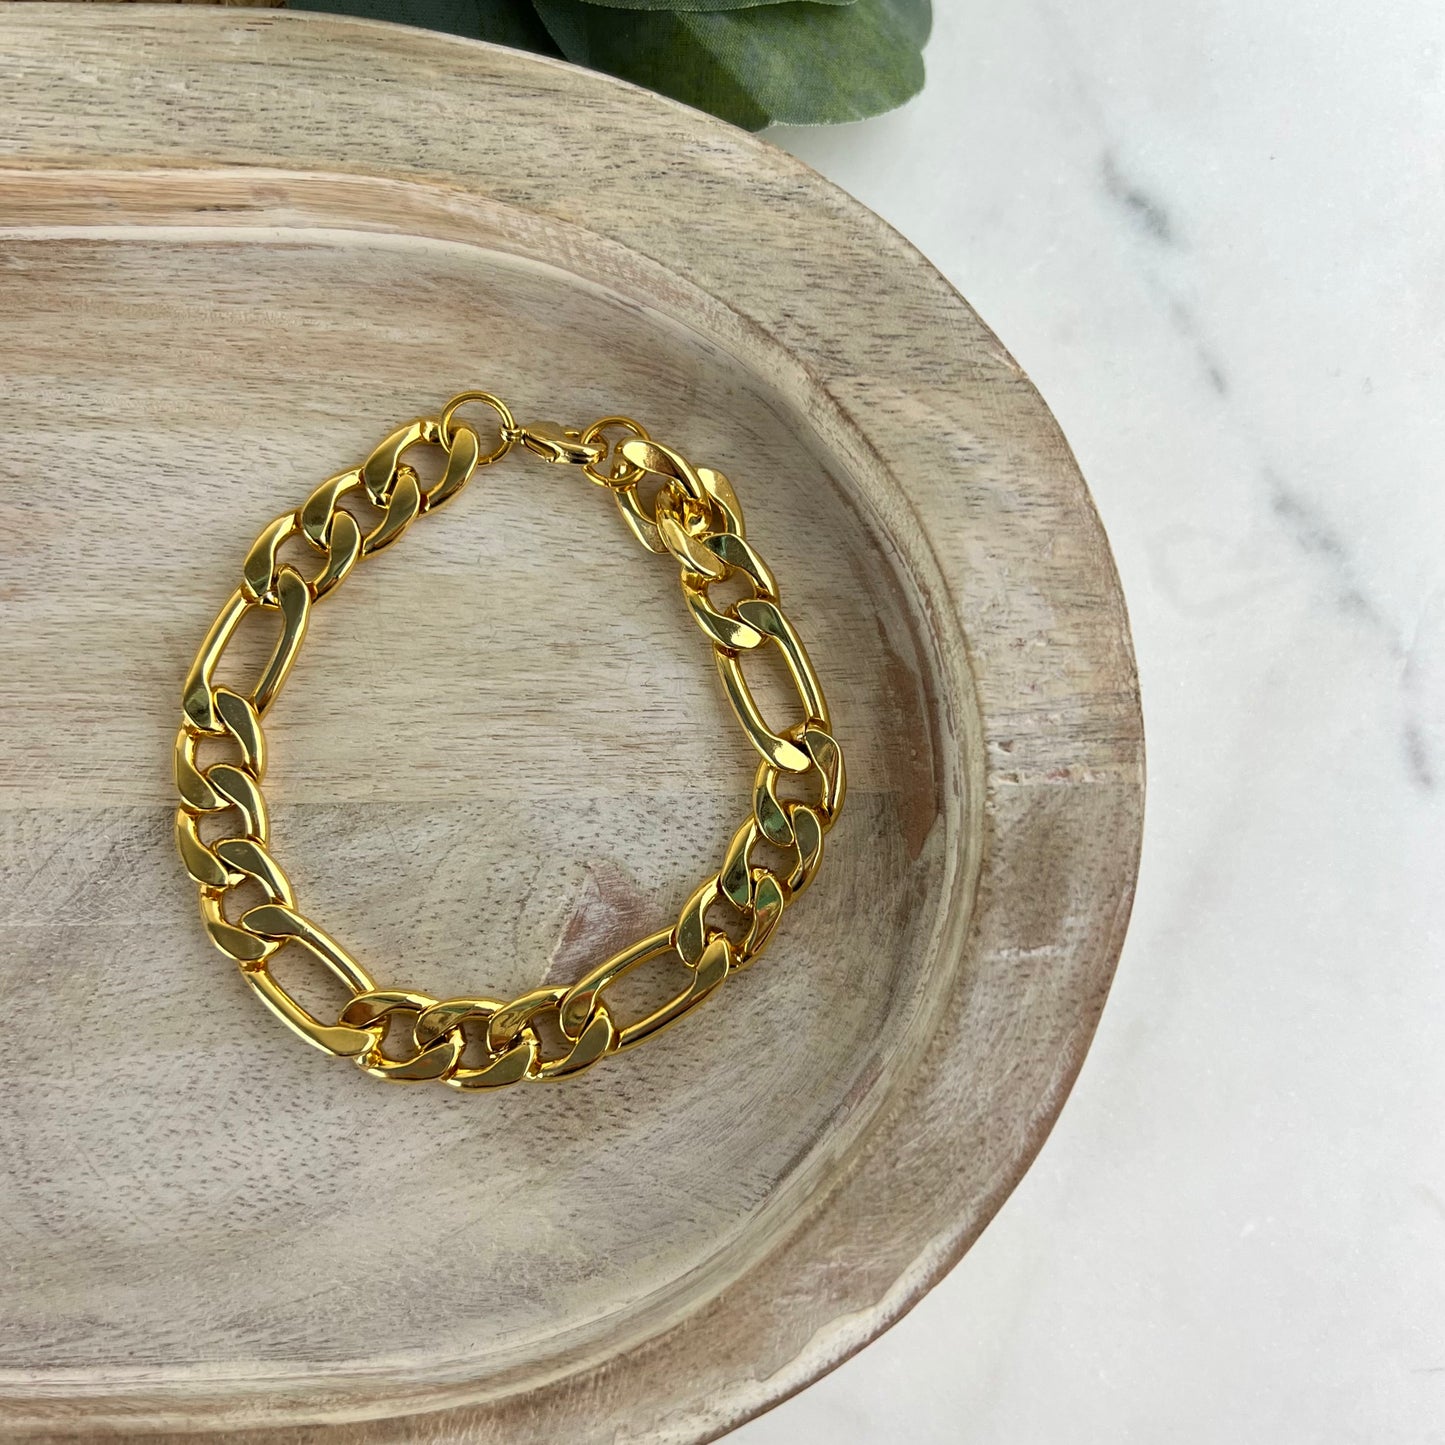 Gold Curb Bracelet 7.2 inches 24kt gold plated